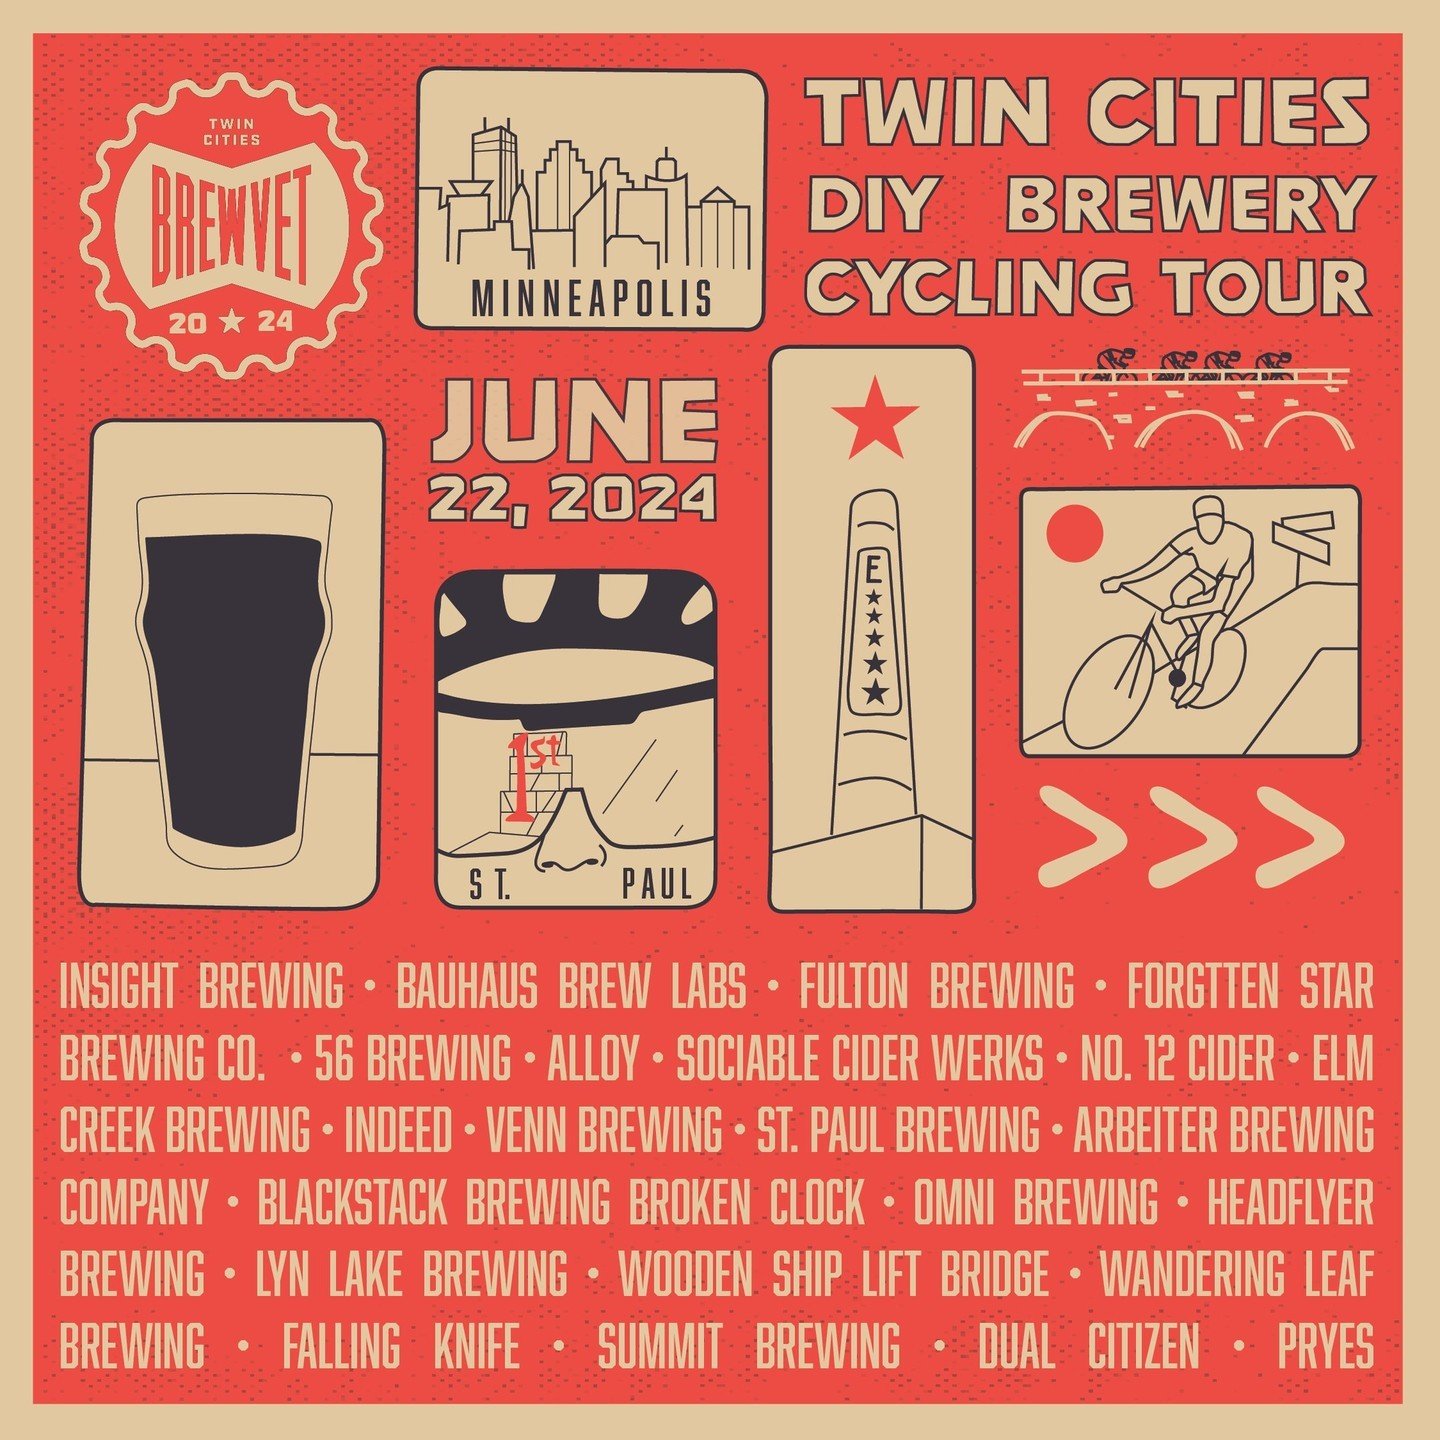 We&rsquo;re partnering with @forgottenstarbrewing for the 3rd annual Twin Cities Brewvet Bike Tour, a DIY style bike tour - make sure to add us to your route for the day!⁠
⁠
Event details:⁠
● Saturday, June 22, 2024⁠
● Ride begins at 12pm⁠
● 26 parti